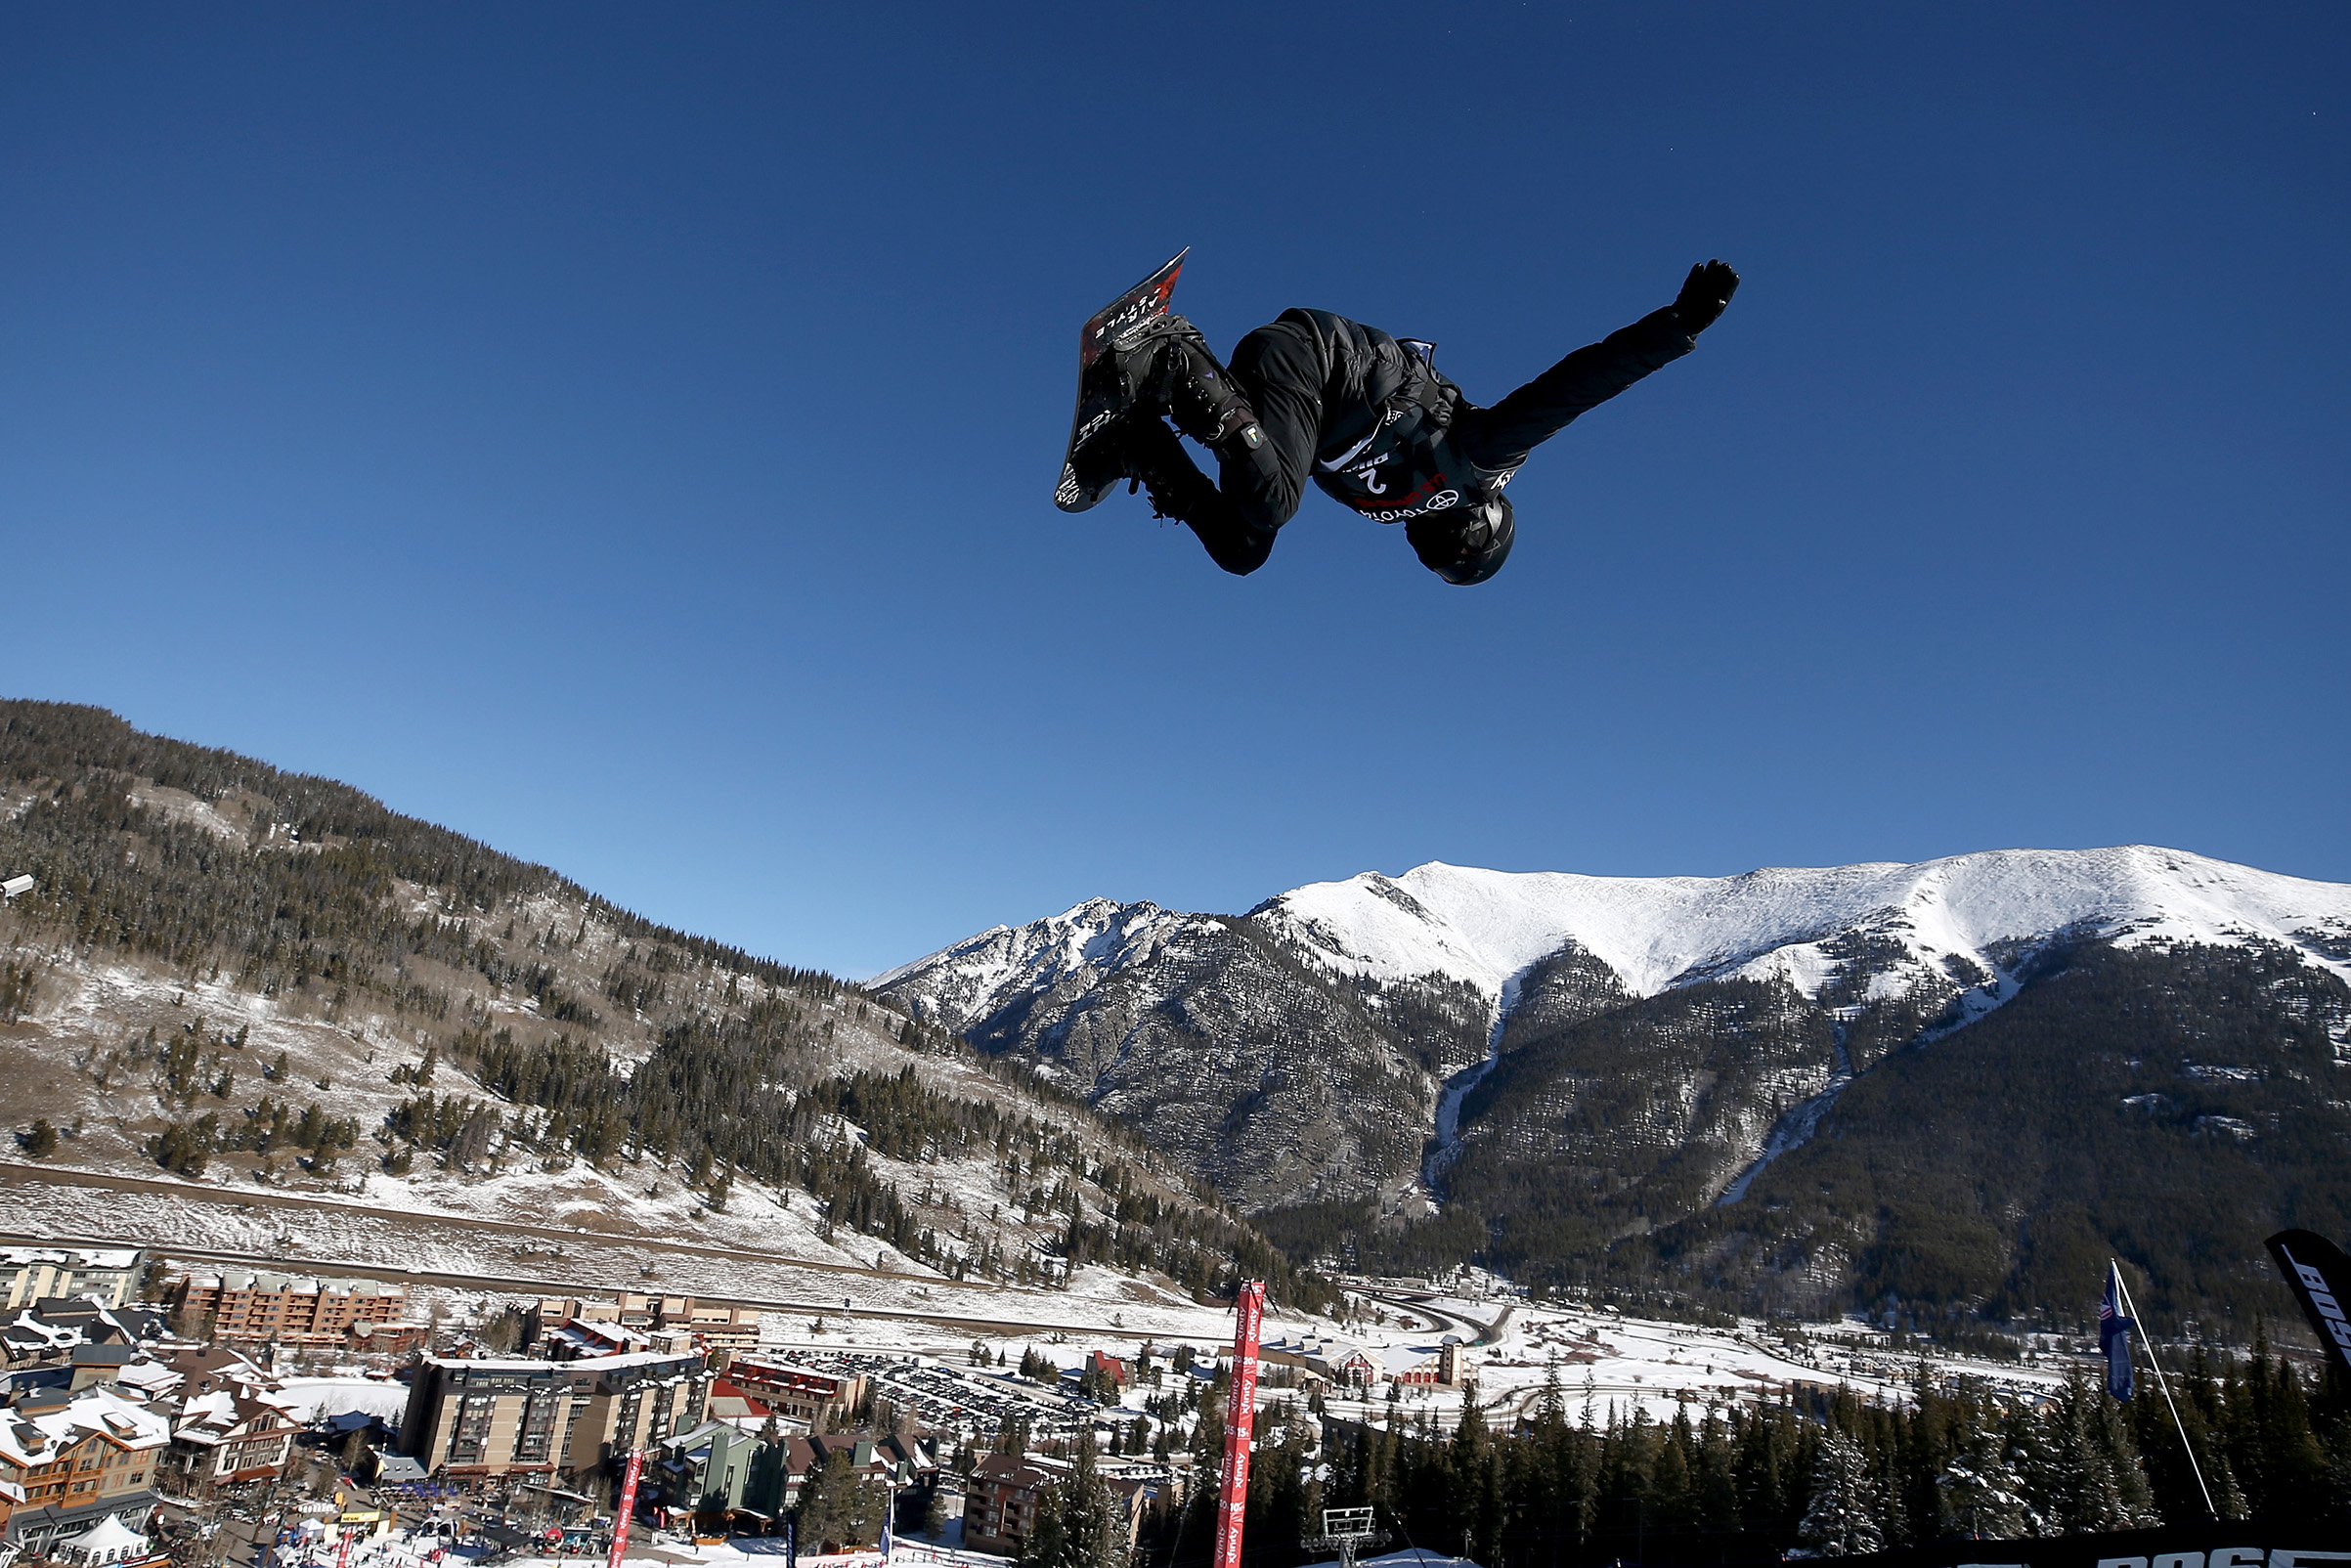 Olympic athlete Shaun White of the United States competes in the finals of the FIS Snowboard World Cup 2018 Men's Snowboard Halfpipe in Copper Mountain, Colo., on Dec. 9, 2017. Sean M. Haffey—Getty Images (Sean M. Haffey—Getty Images)